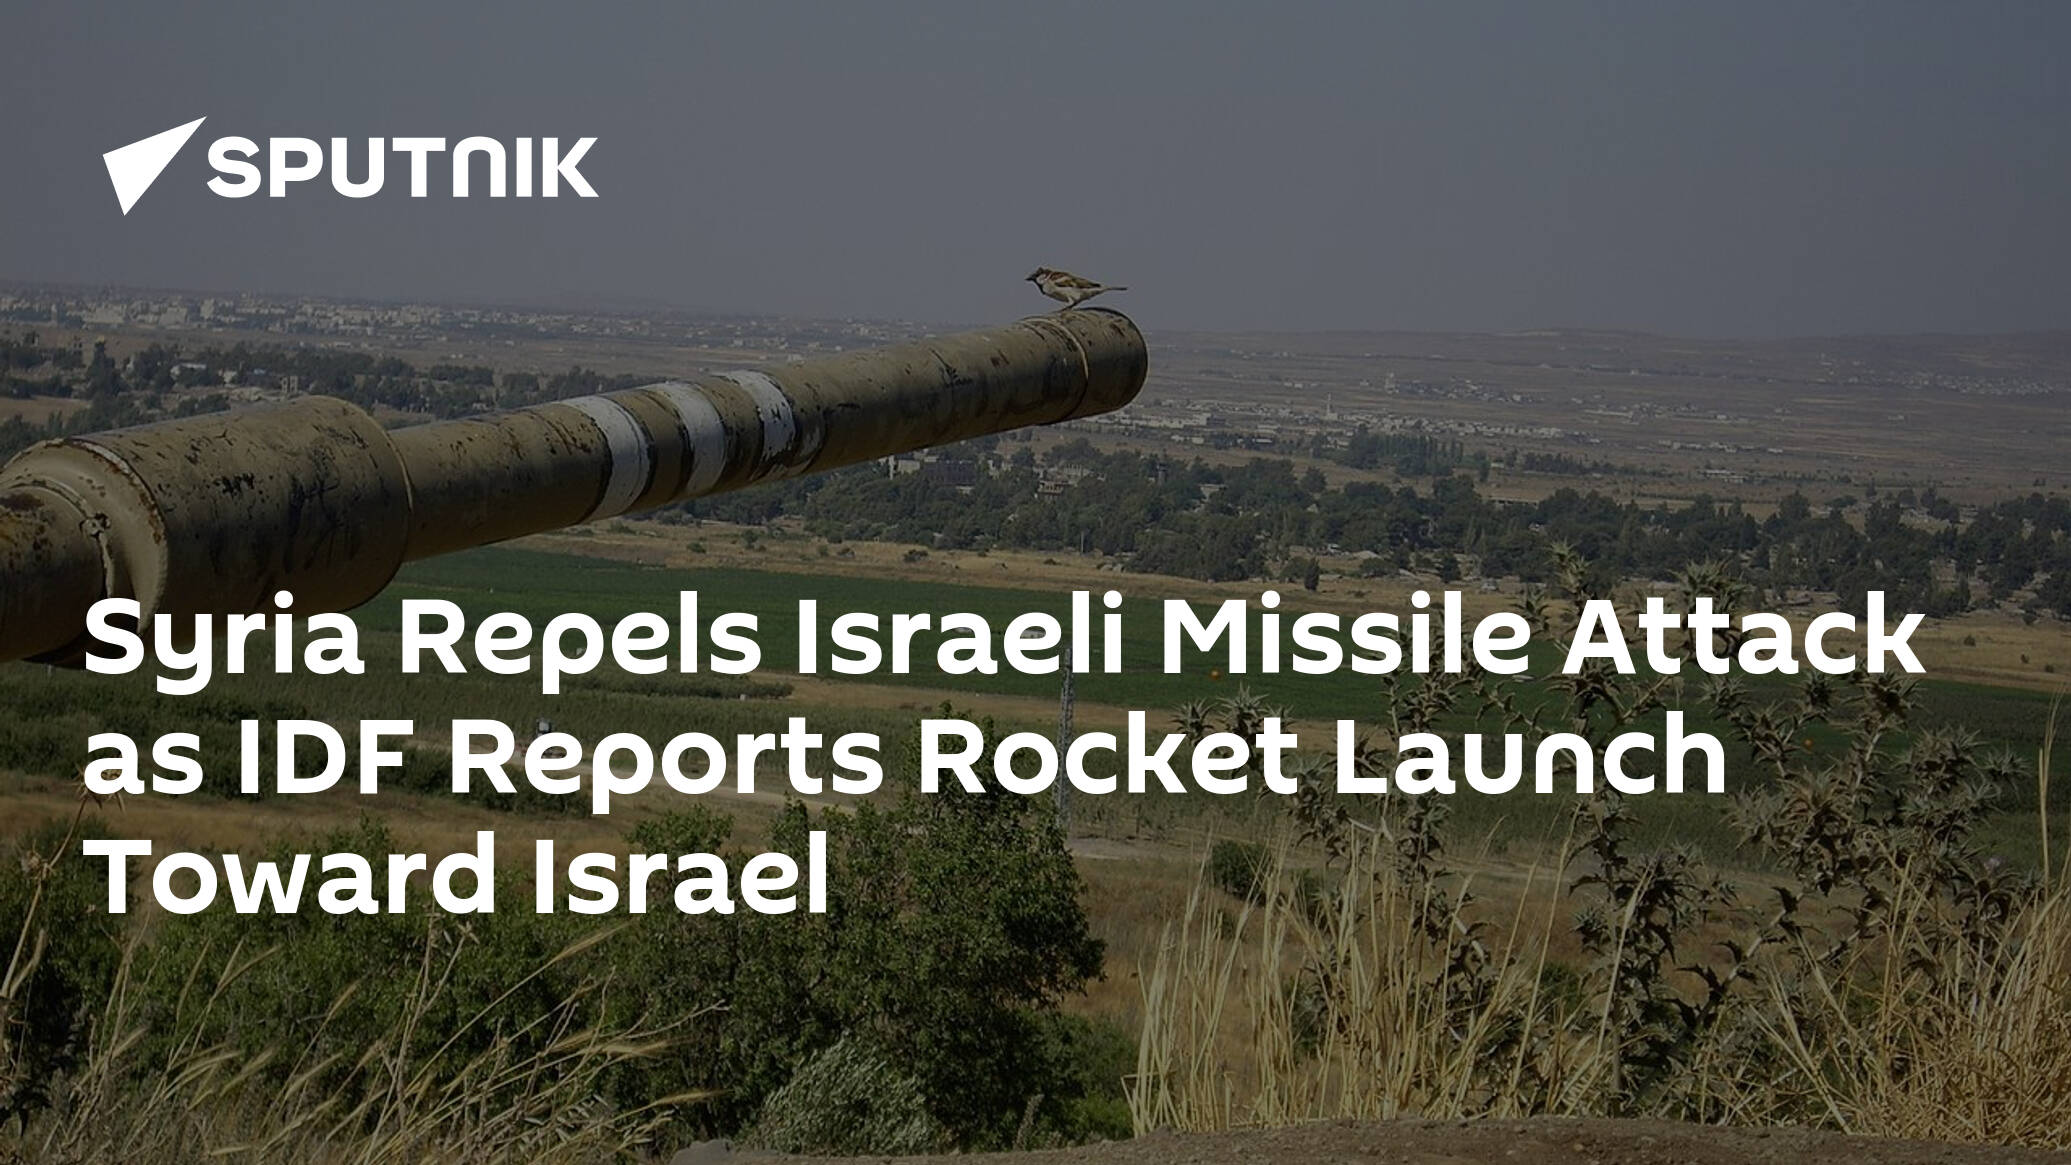 Rocket Launched From Syria Toward Israel – IDF